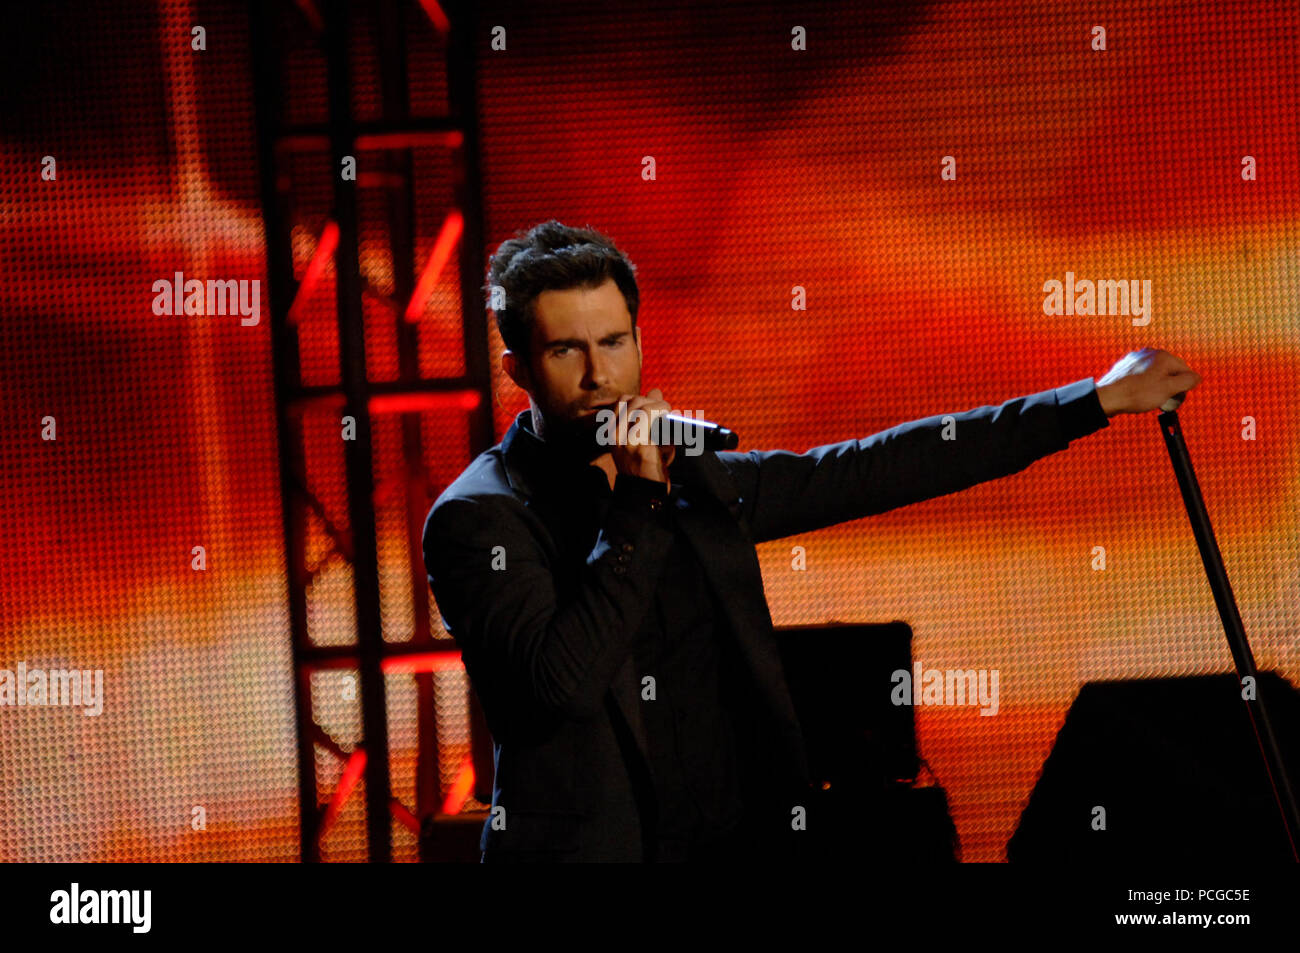 Maroon 5's Adam Levine performs at the Neighborhood Ball in downtown Washington, D.C., Jan. 20, 2009. More than 5,000 men and women in uniform are providing military ceremonial support to the presidential inauguration, a tradition dating back to George Washington's 1789 inauguration. ( Stock Photo